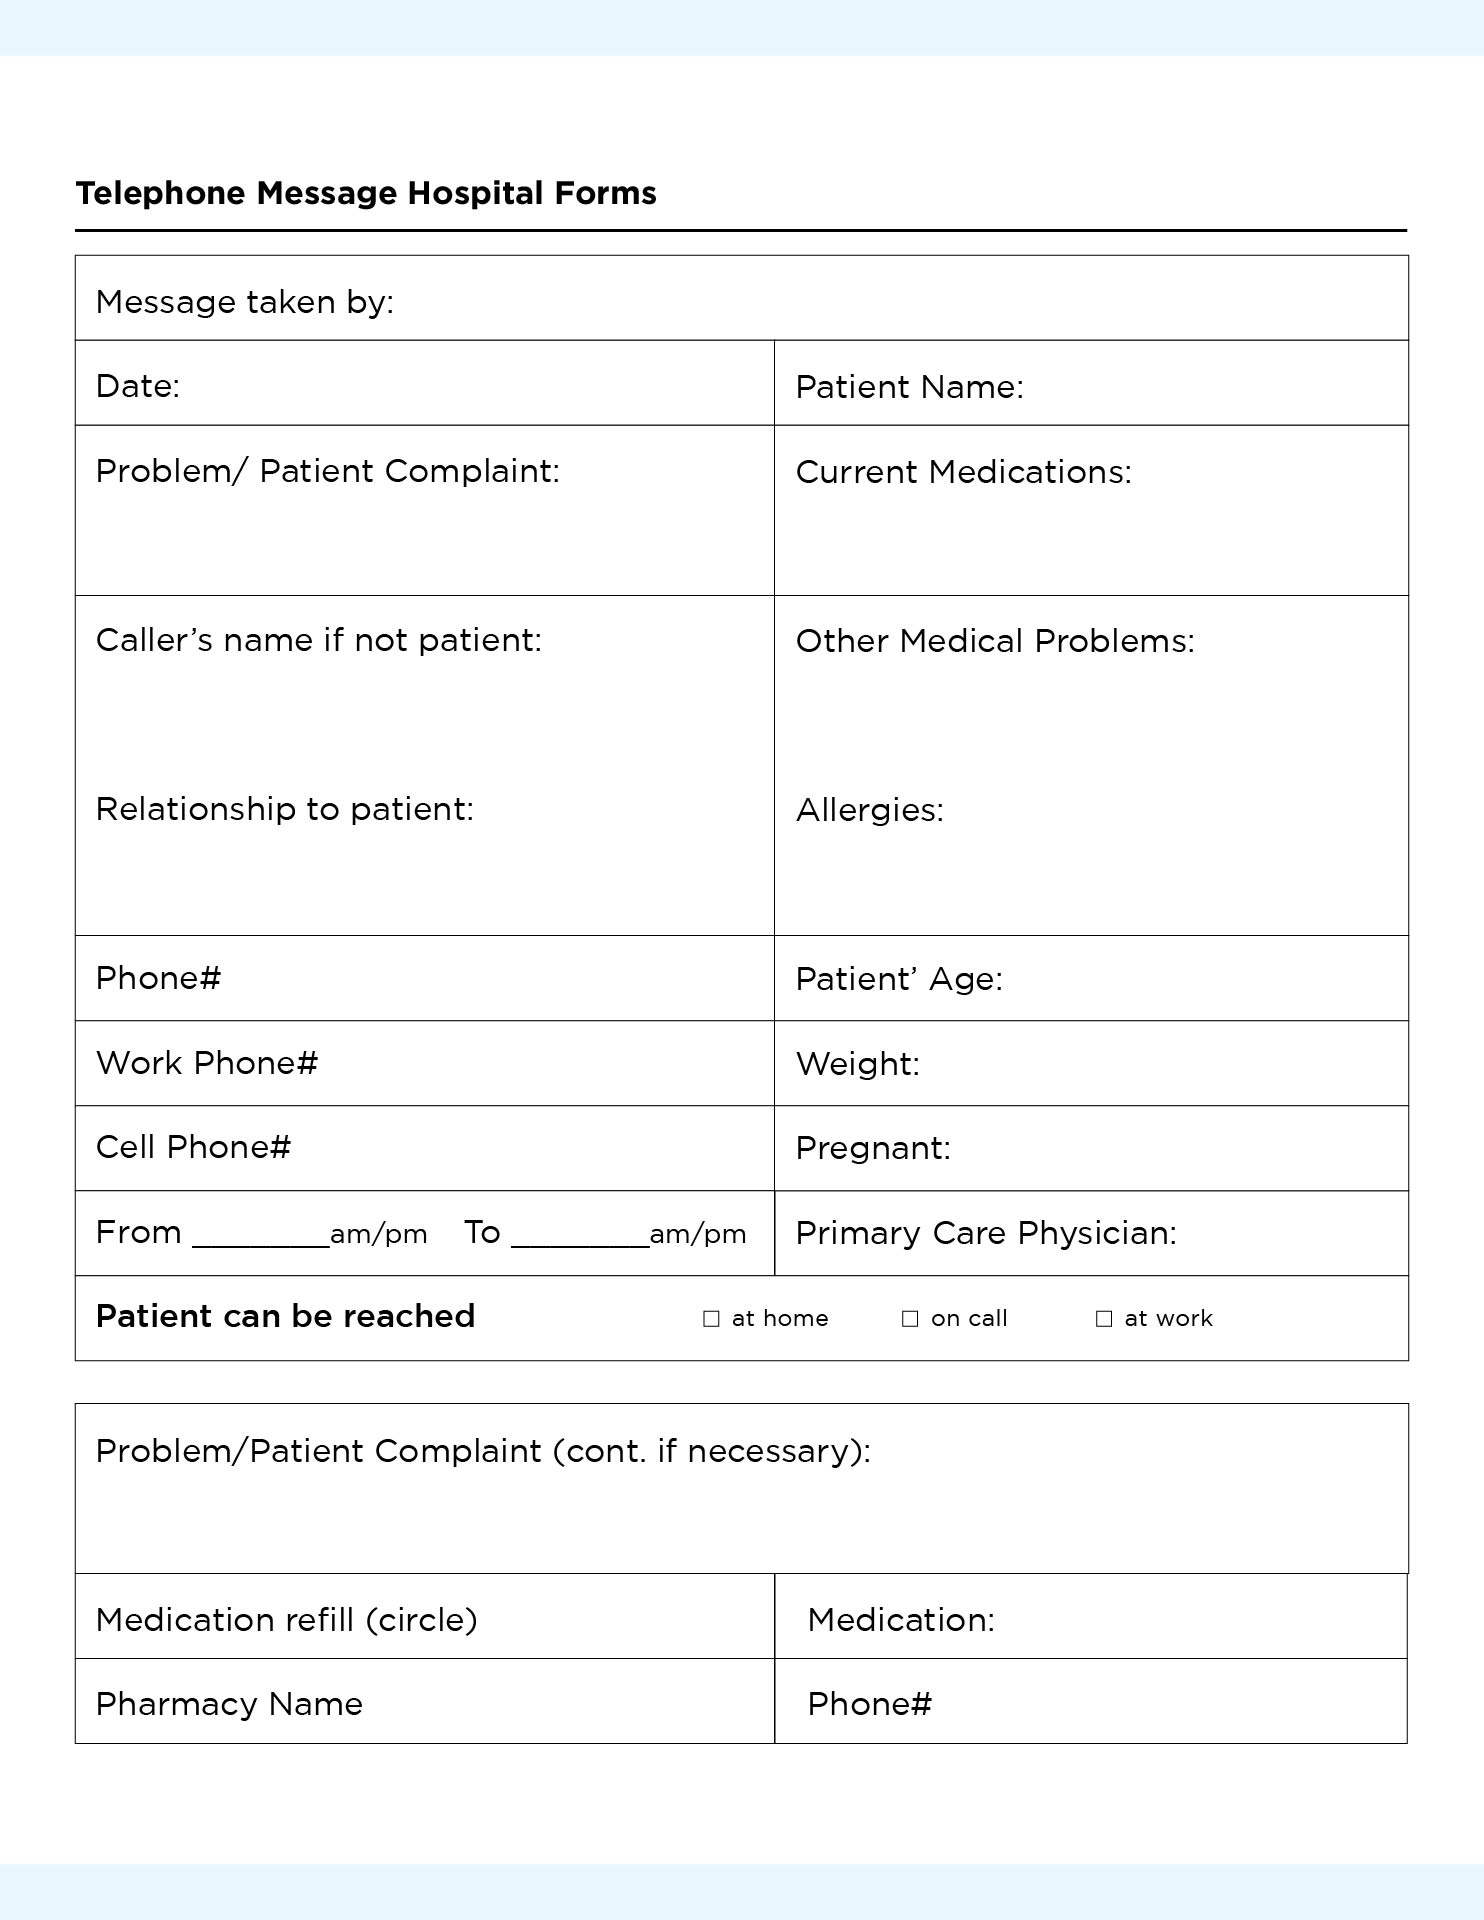 Printable Telephone Message Hospital Forms Templates